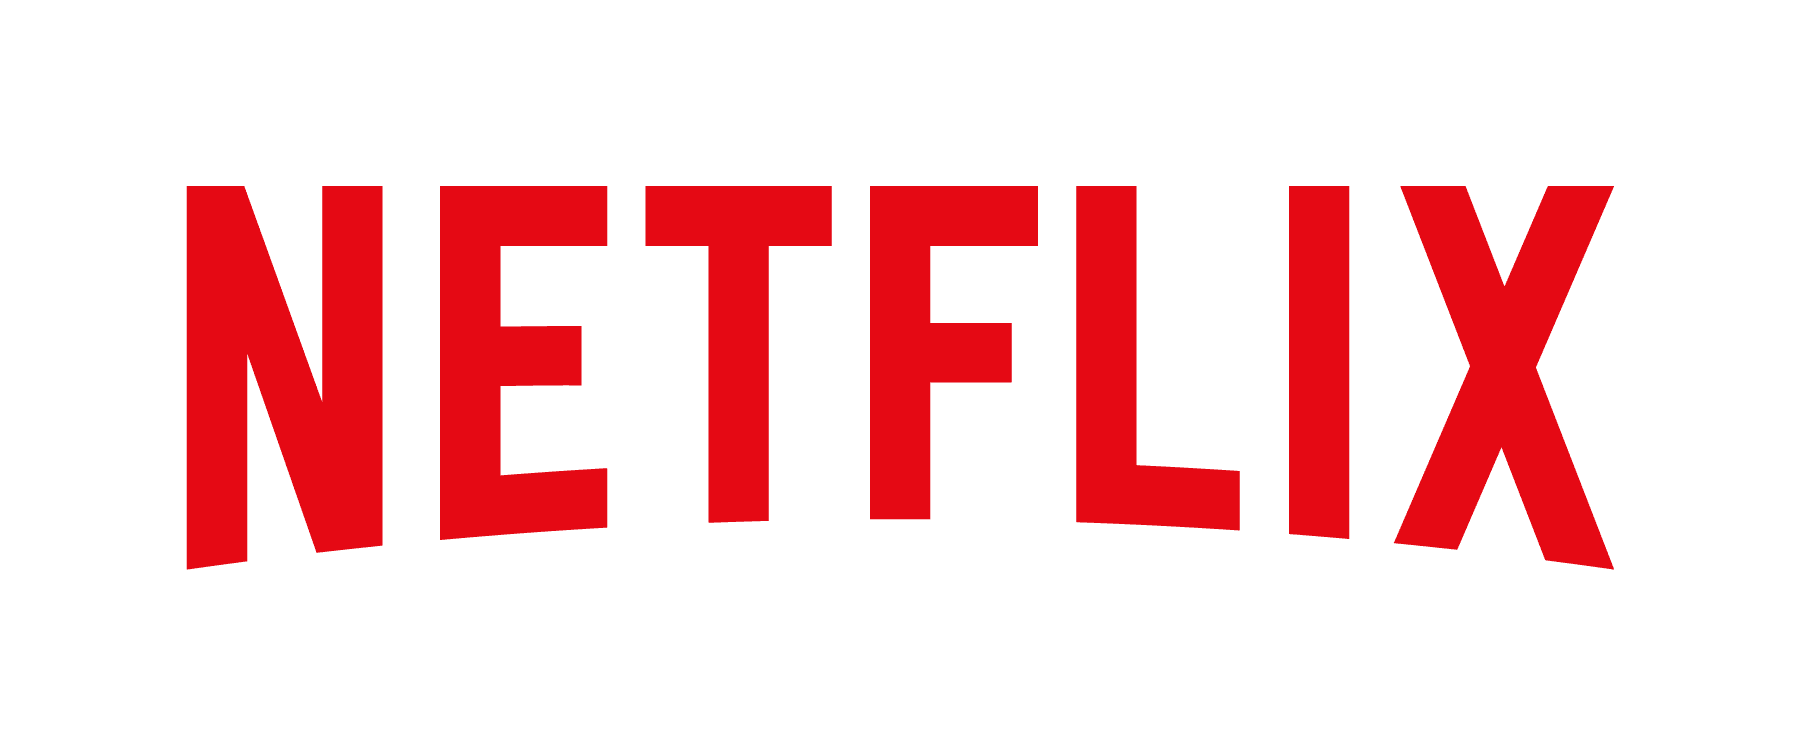 This is the Netflix logo